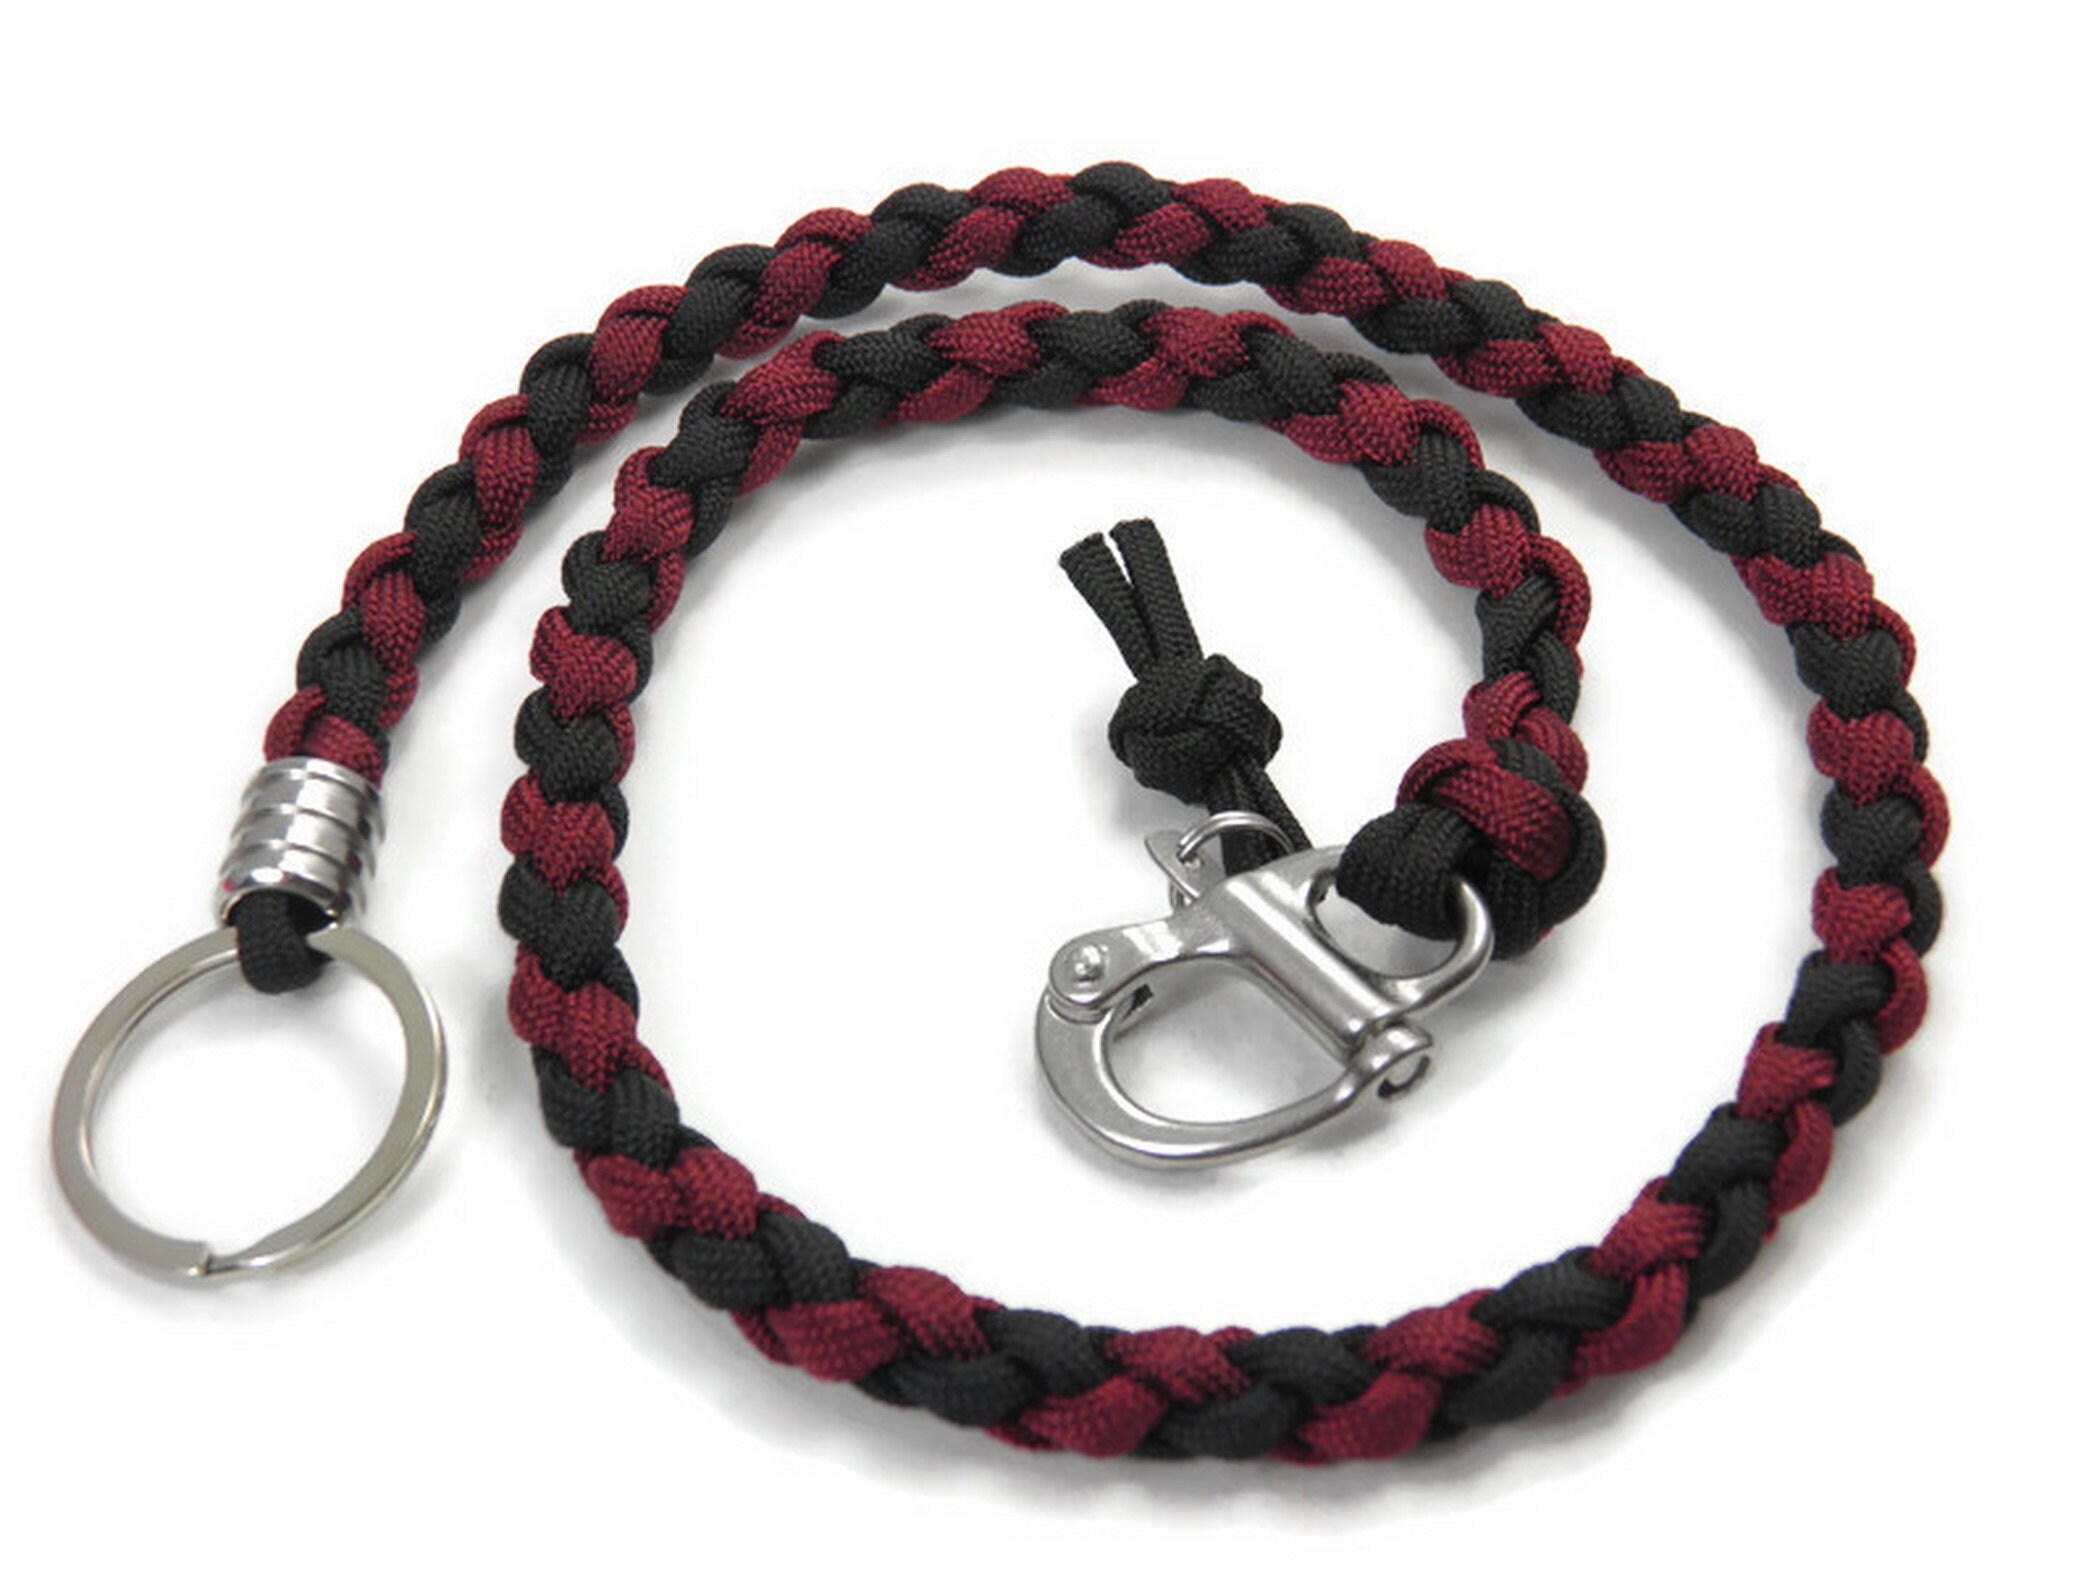 Bracelet in red leather with carabiner closure in stainless steel